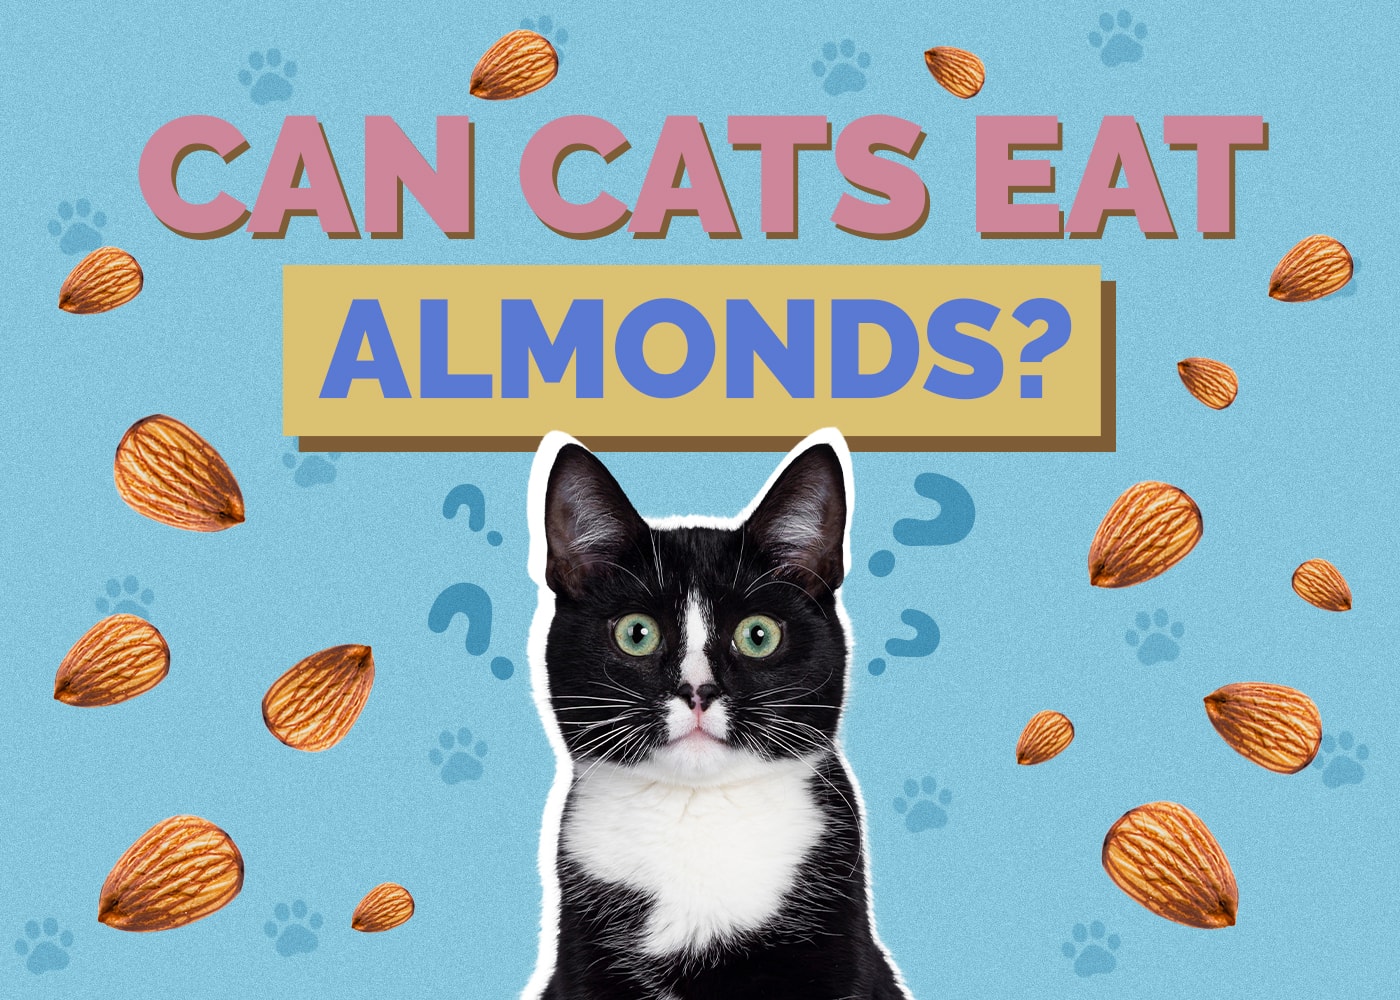 Can Cats Eat almonds